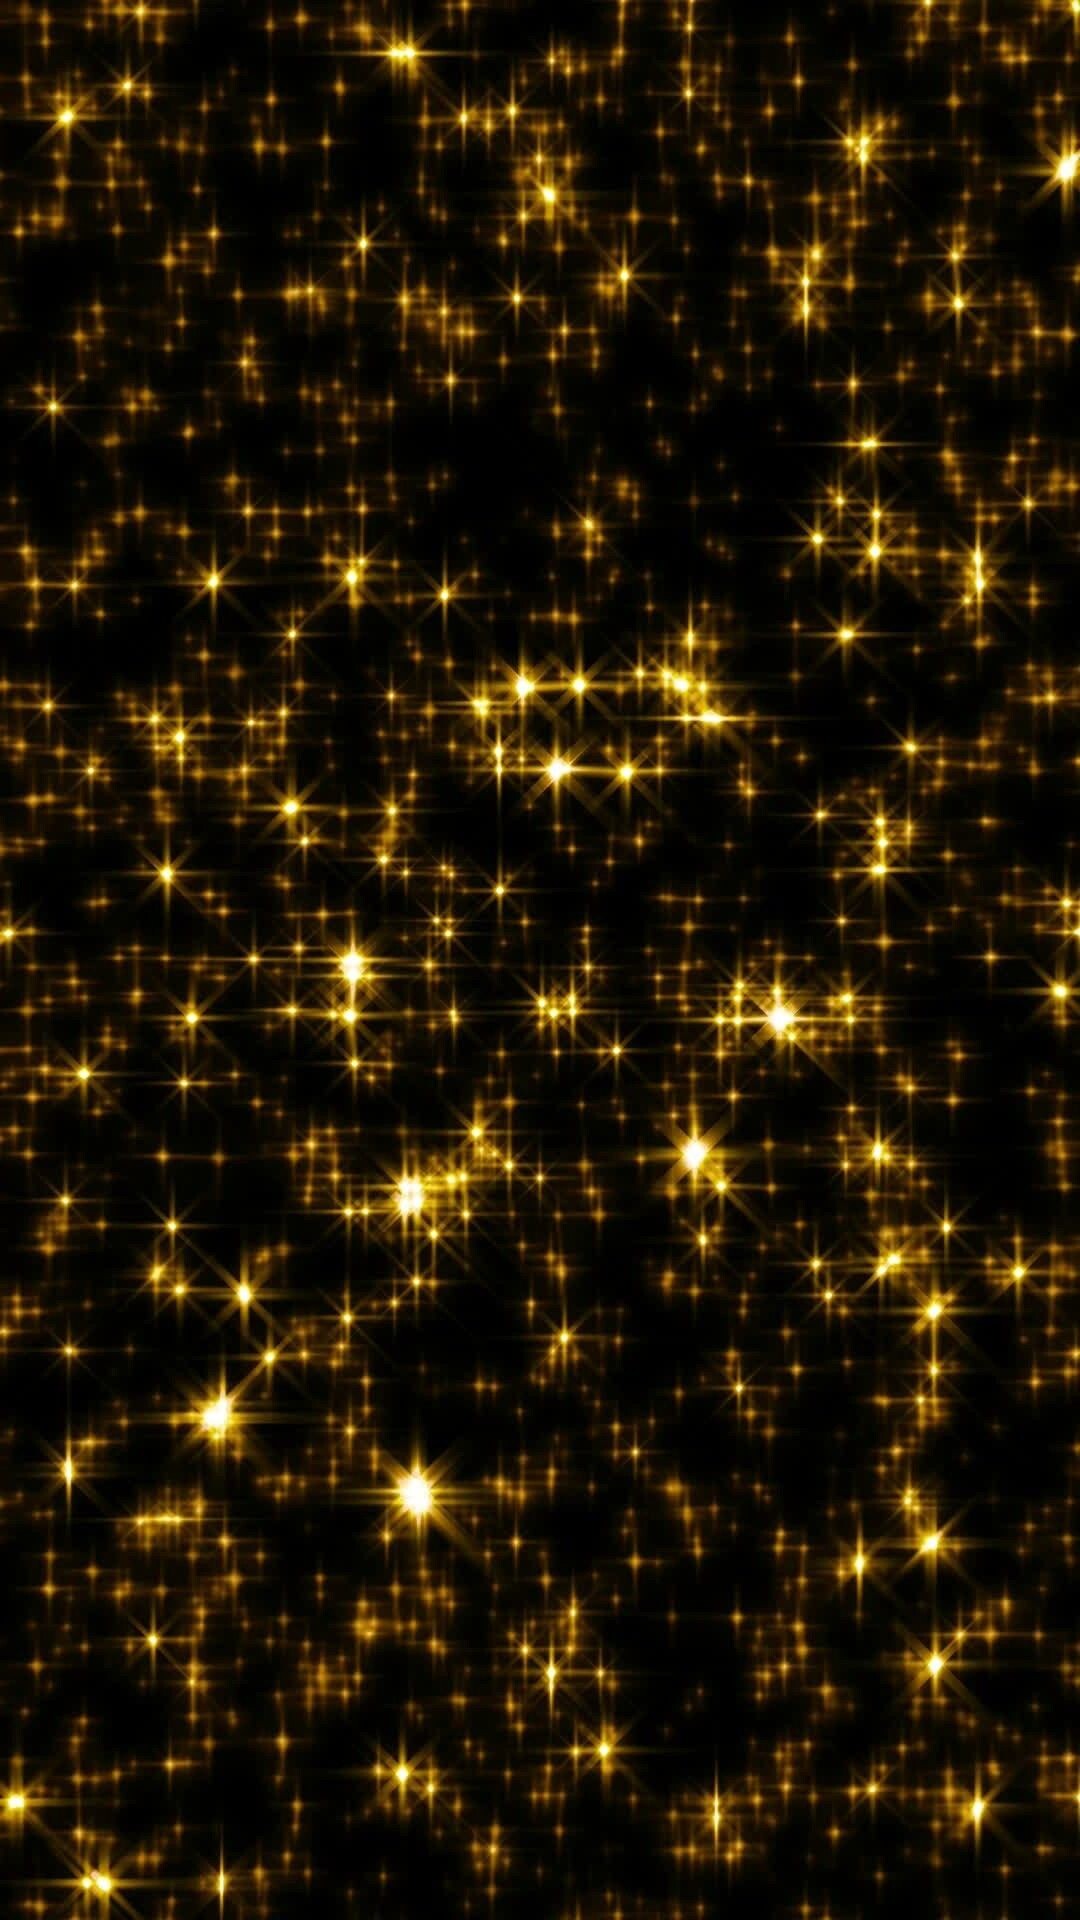 Gold Dots: Astronomical object, Fixed bright points in the night sky, Stars, Massive self-luminous celestial bodies. 1080x1920 Full HD Wallpaper.